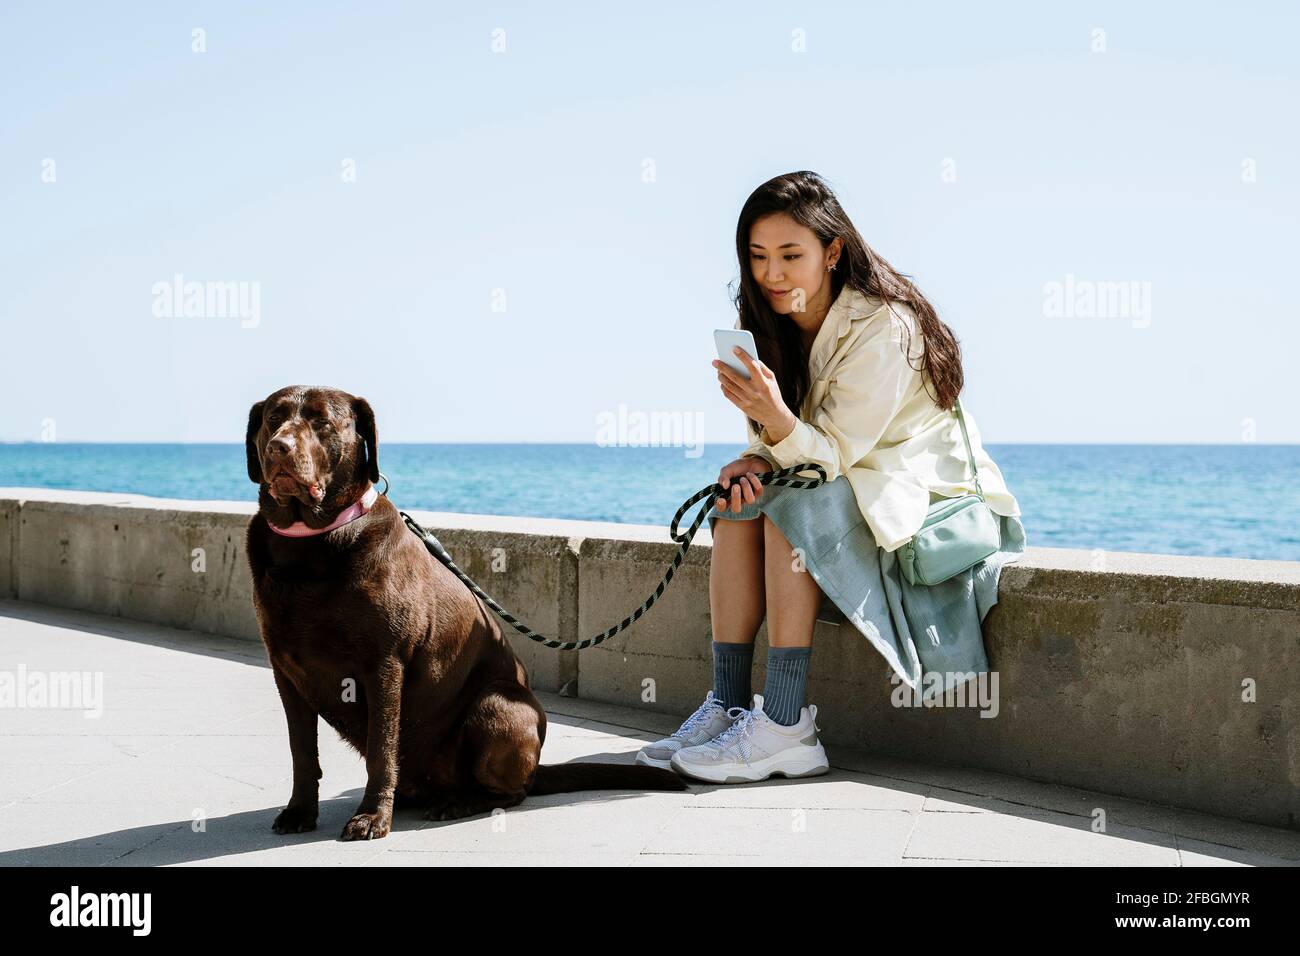 Female tourist with Chocolate Labrador sitting on retaining wall by sea Stock Photo